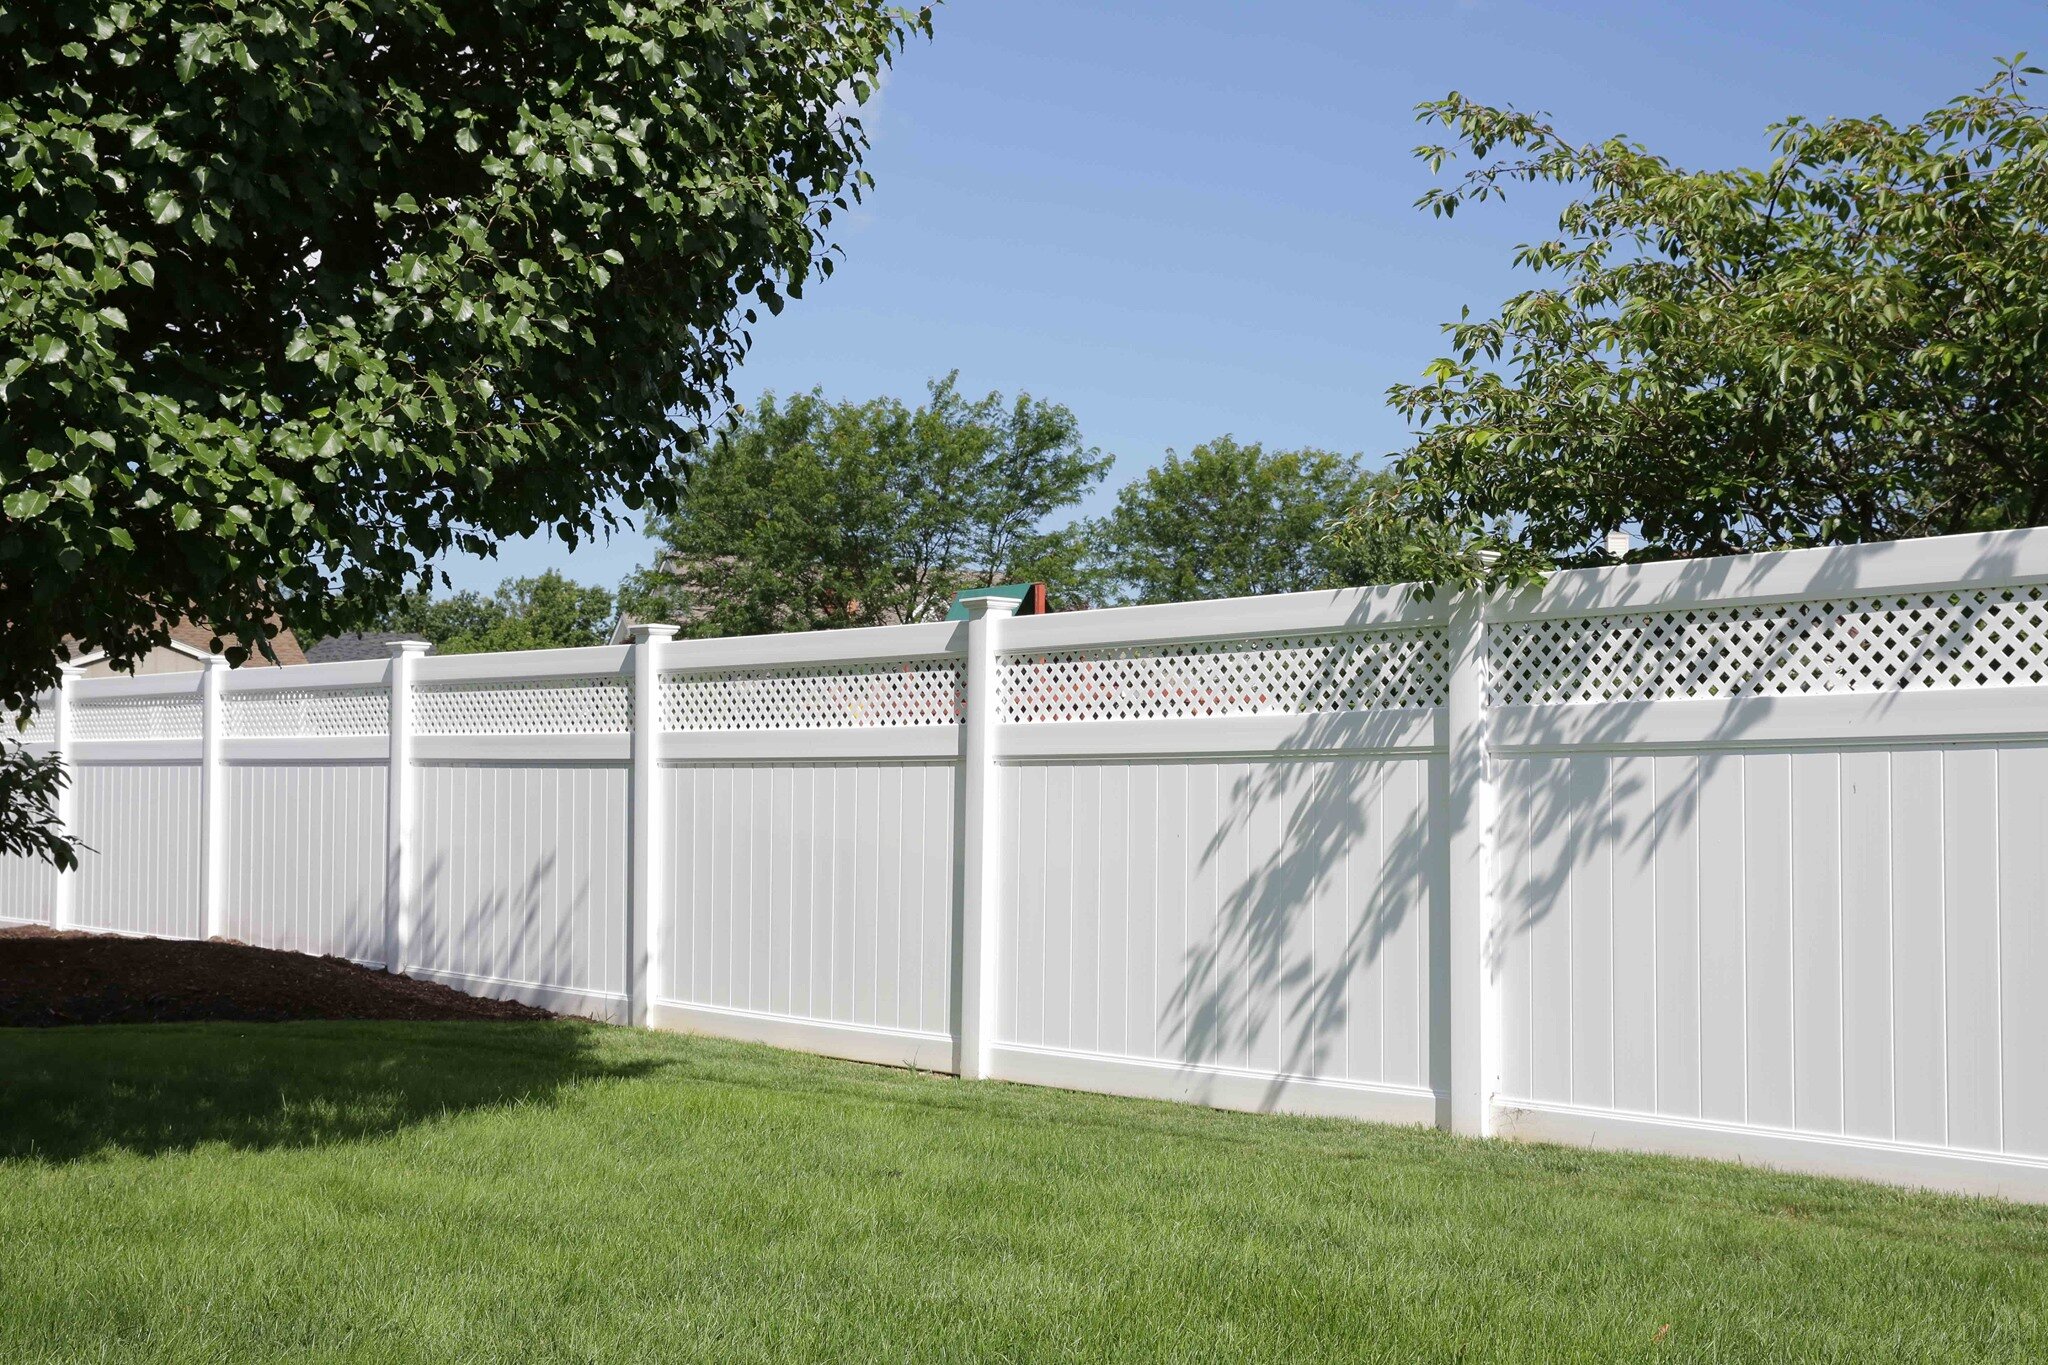 Finnegan Fence Company - NH's Most Trusted Fence Contractor